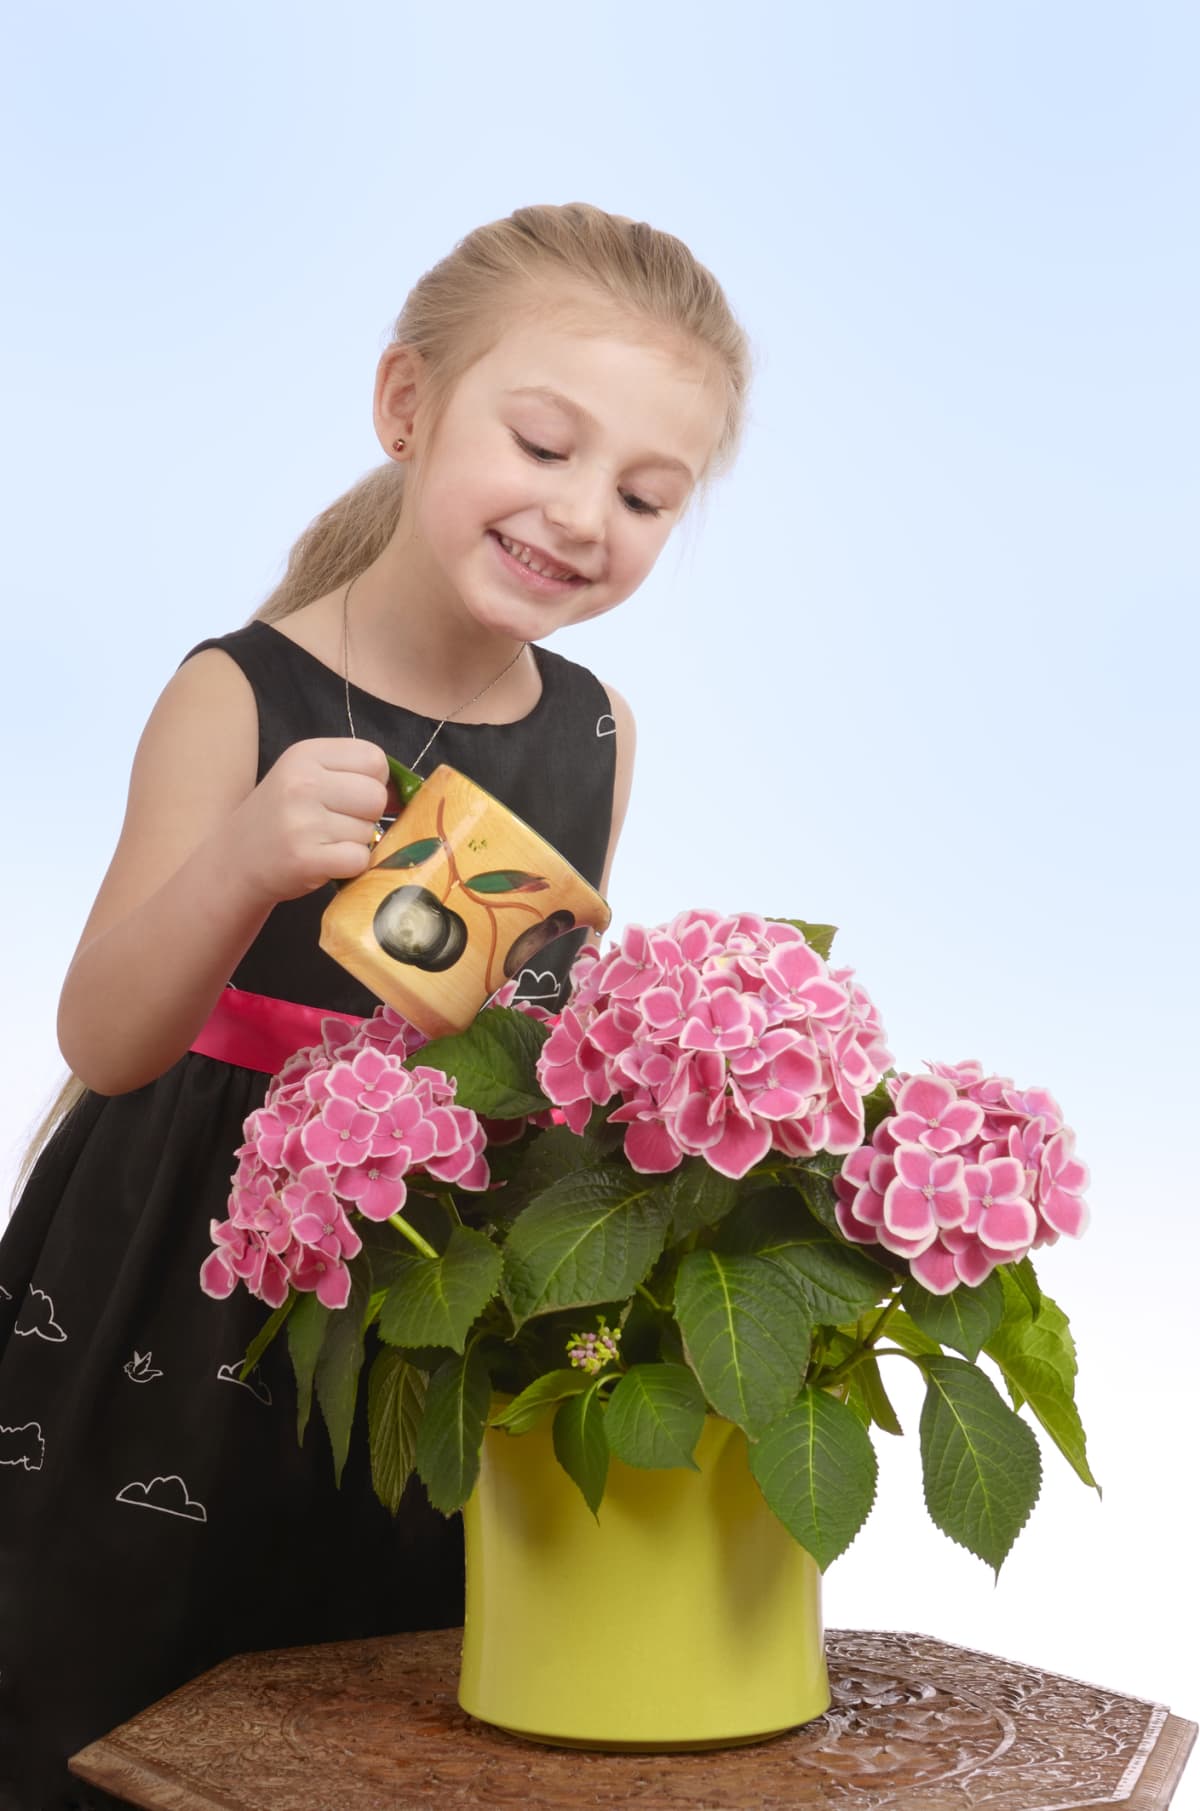 Smiling little girl watering potted hydrangea plant